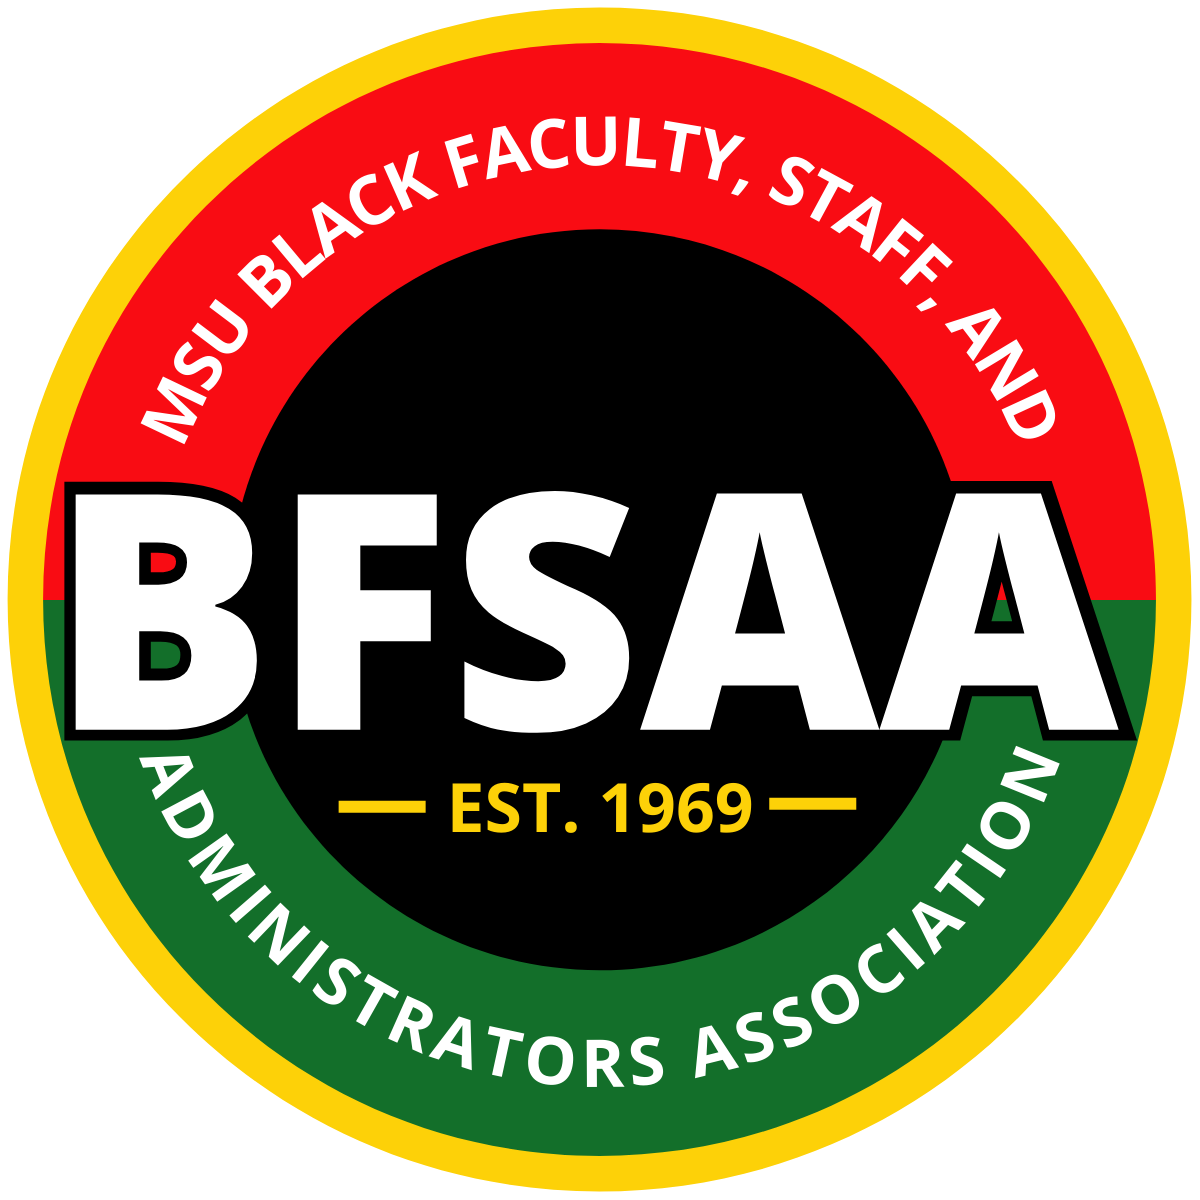 Black Faculty Staff and Administrators Association